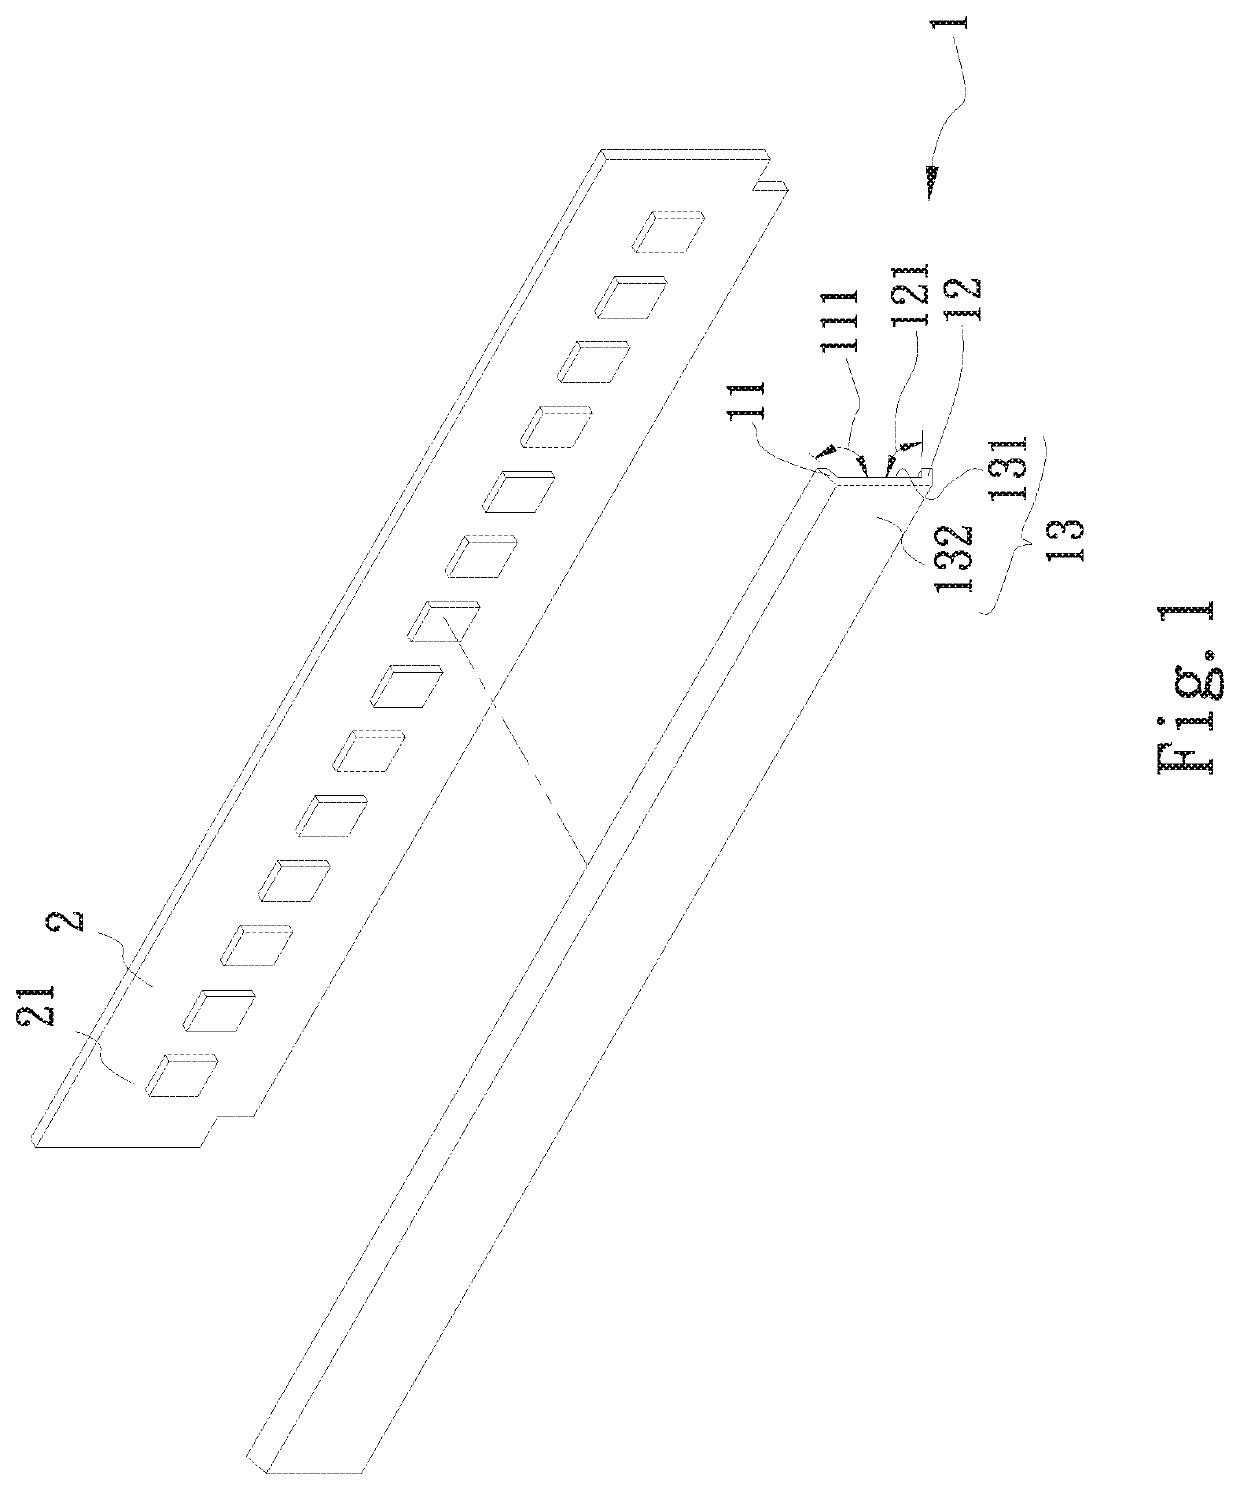 Memory auxiliary heat transfer structure